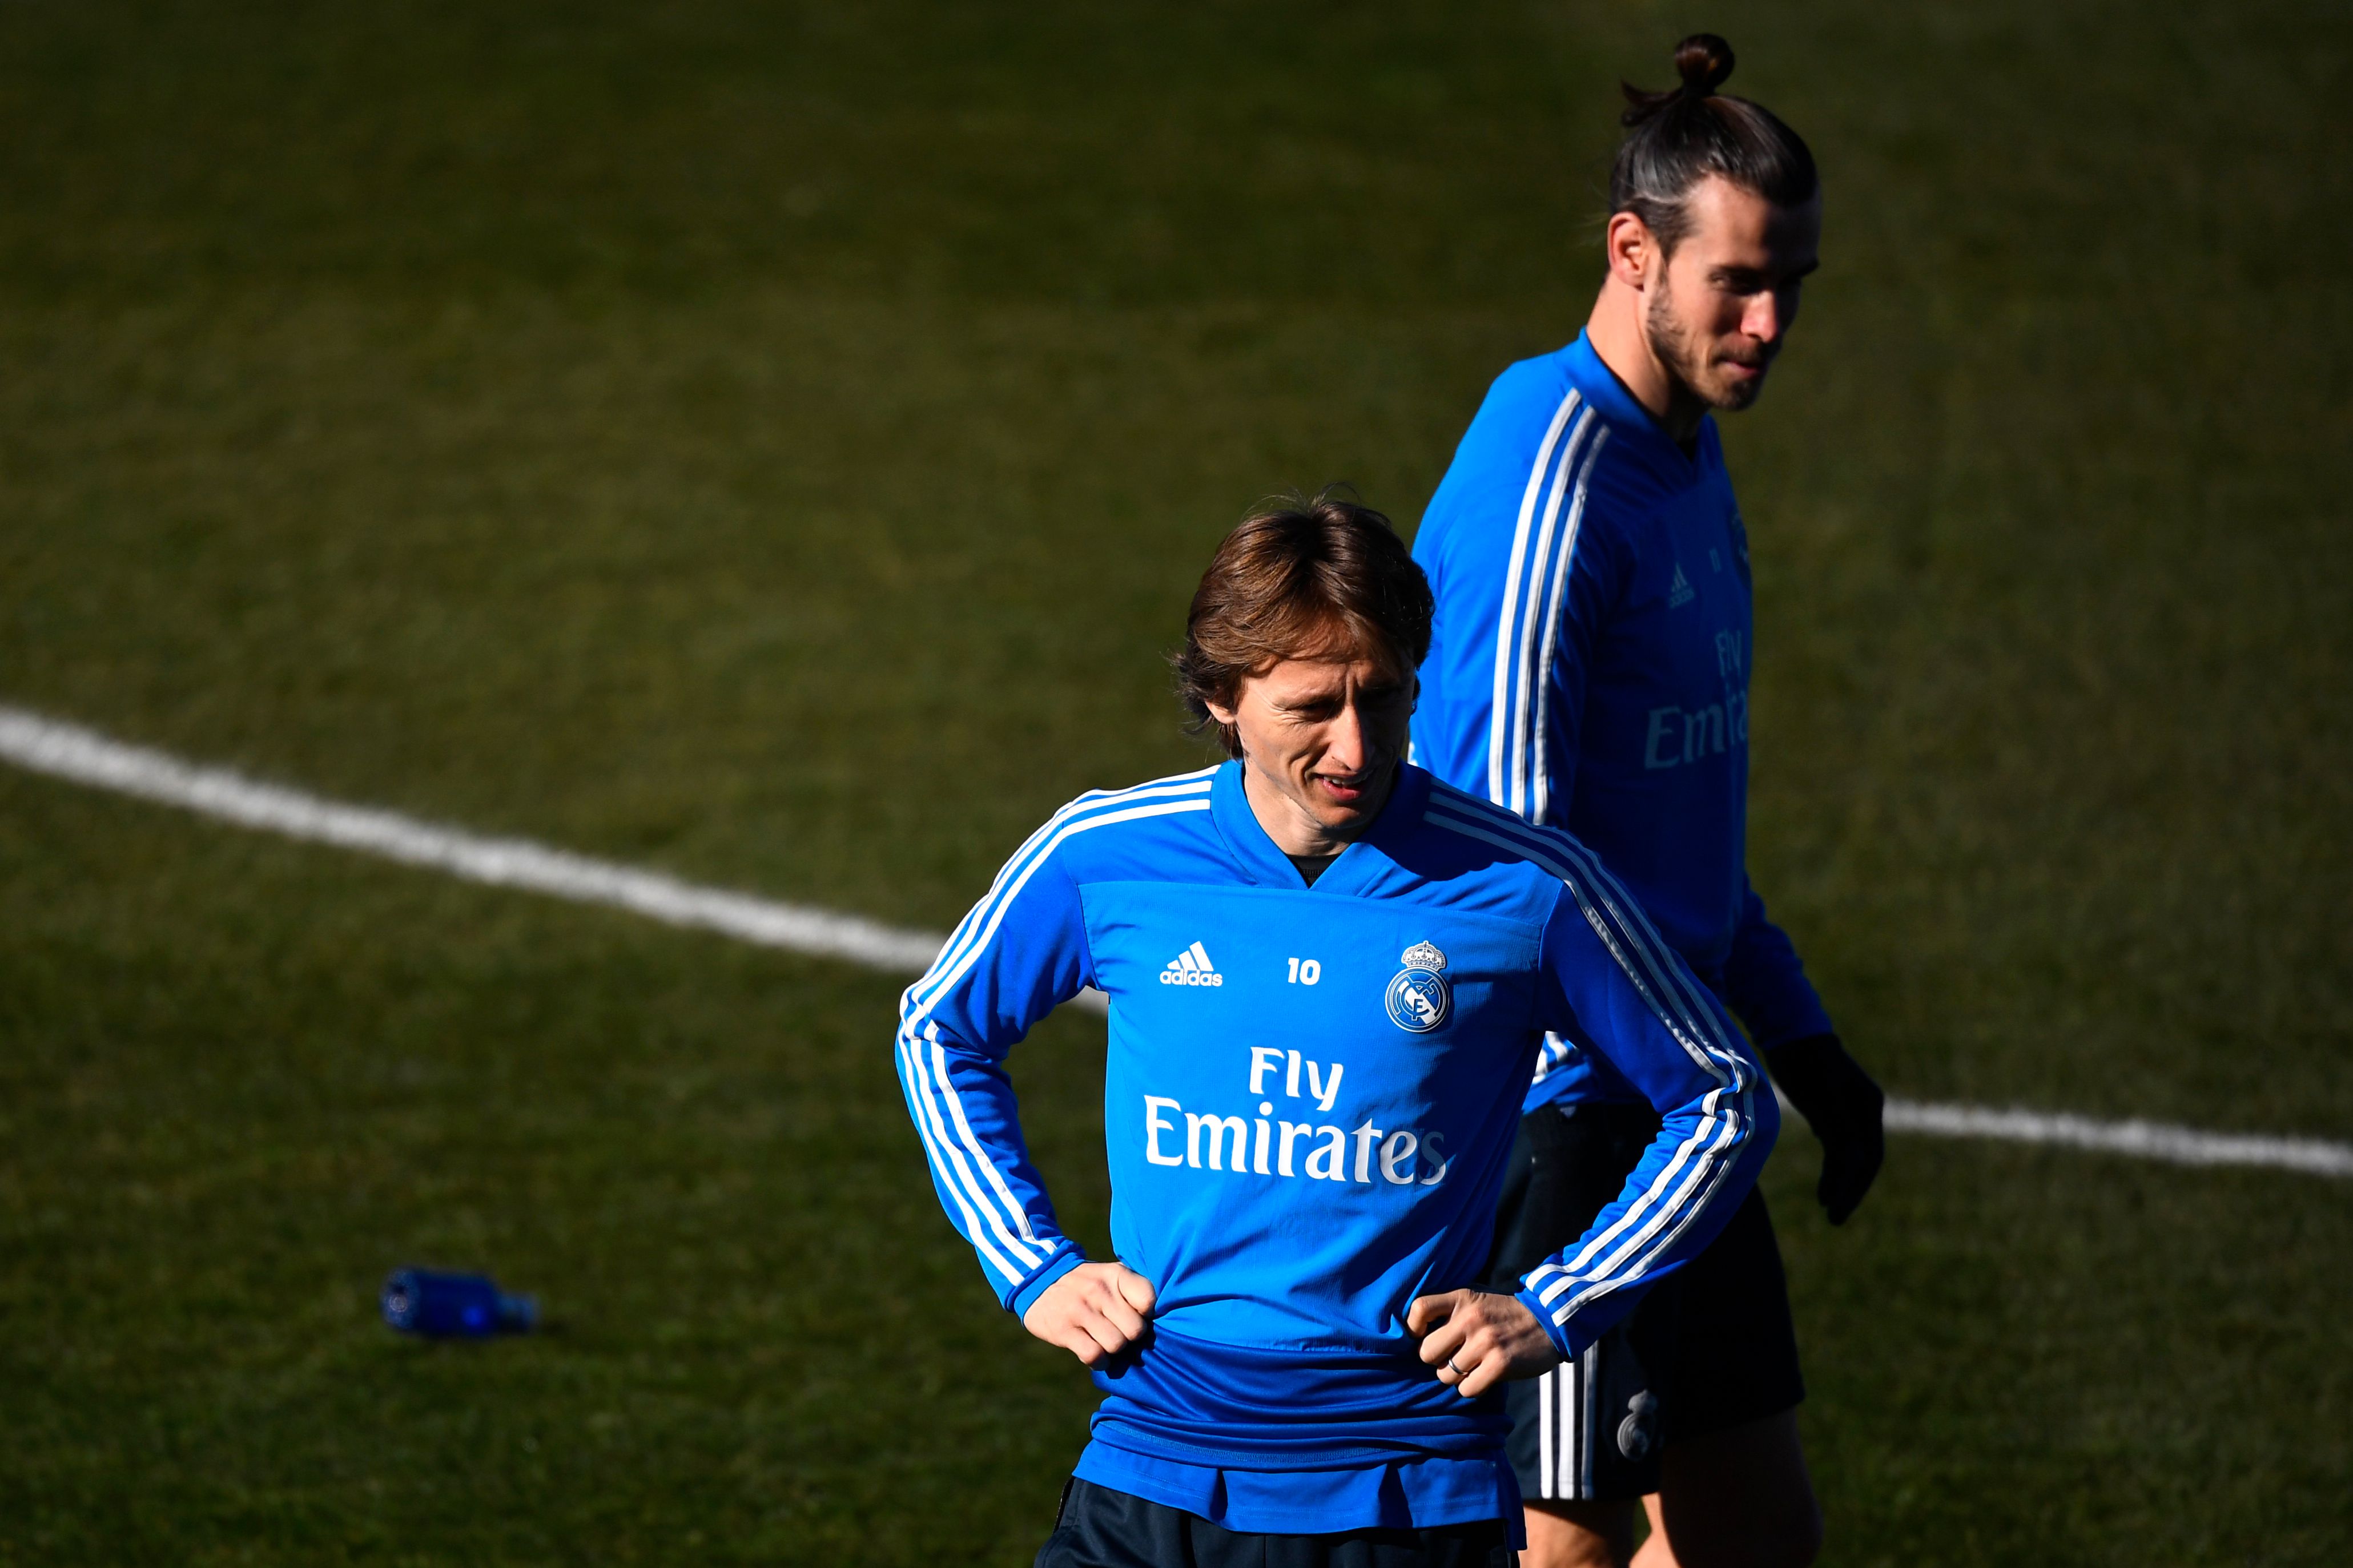 Real Madrid's Croatian midfielder Luka Modric and Real Madrid's Welsh forward Gareth Bale (back) attend a training session at the club's training ground in the outskirts of Madrid on February 5, 2019 on the eve of the Copa del Rey semi-final football match between Barcelona and Real Madrid. (Photo by GABRIEL BOUYS / AFP)        (Photo credit should read GABRIEL BOUYS/AFP via Getty Images)